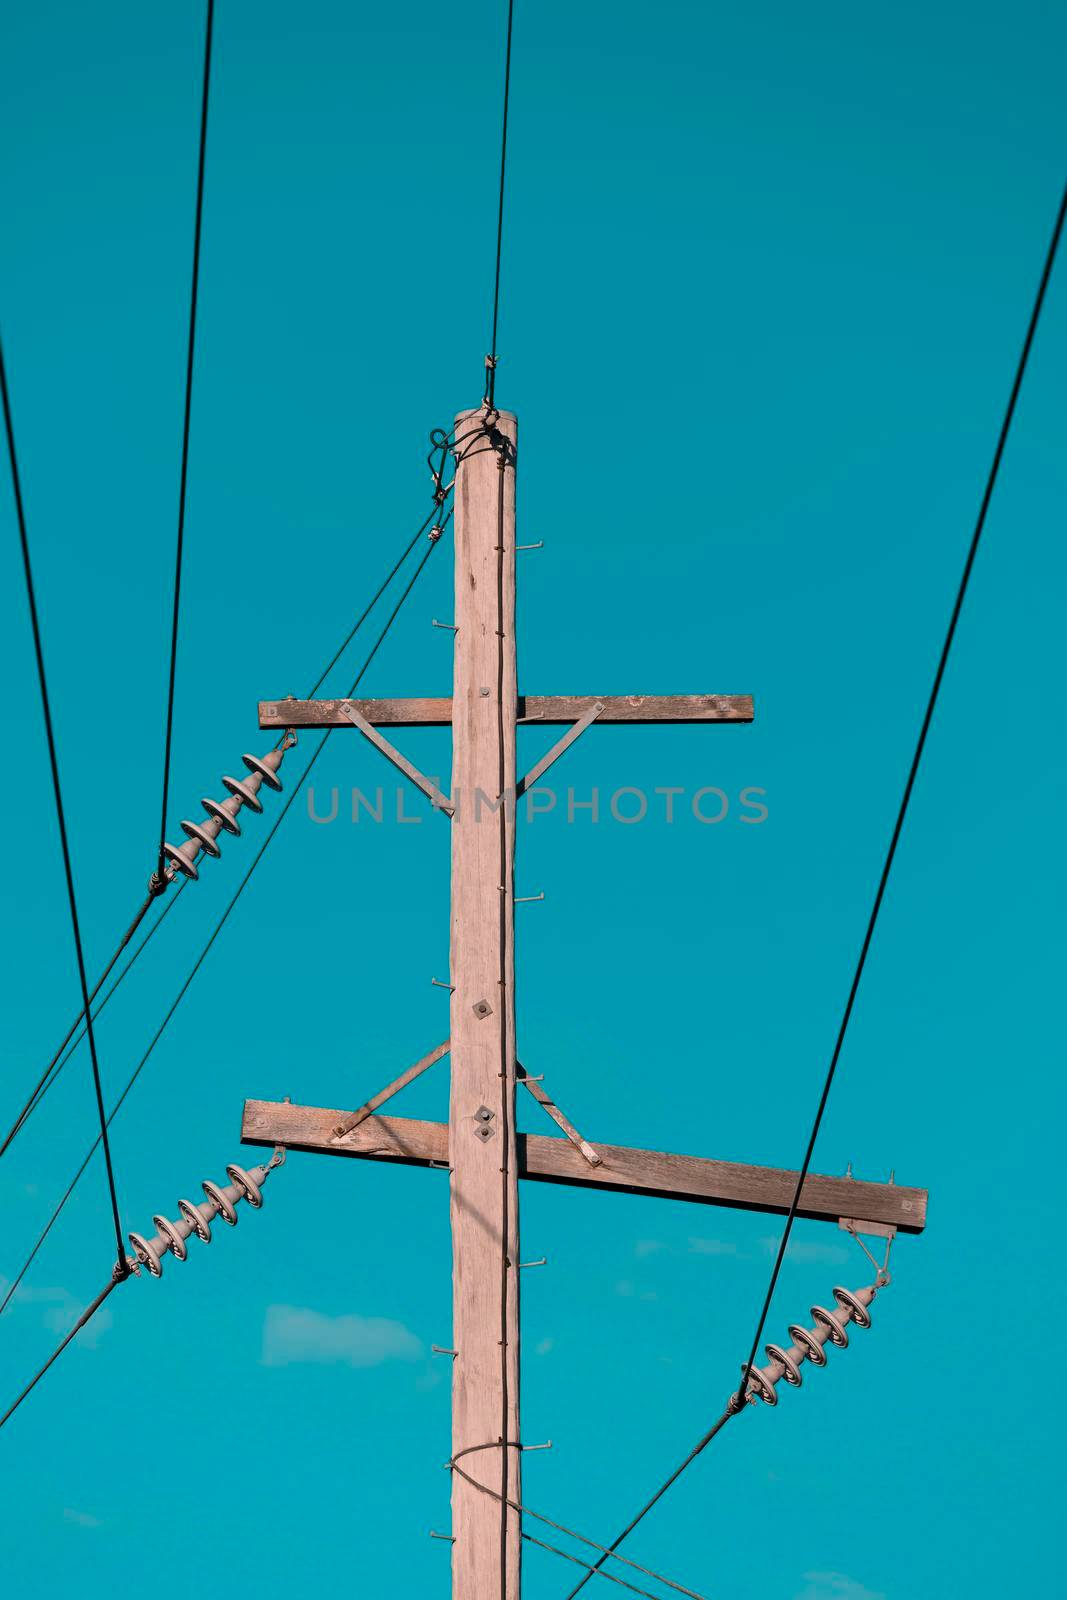 Photograph of a wooden telephone post and cables by WittkePhotos